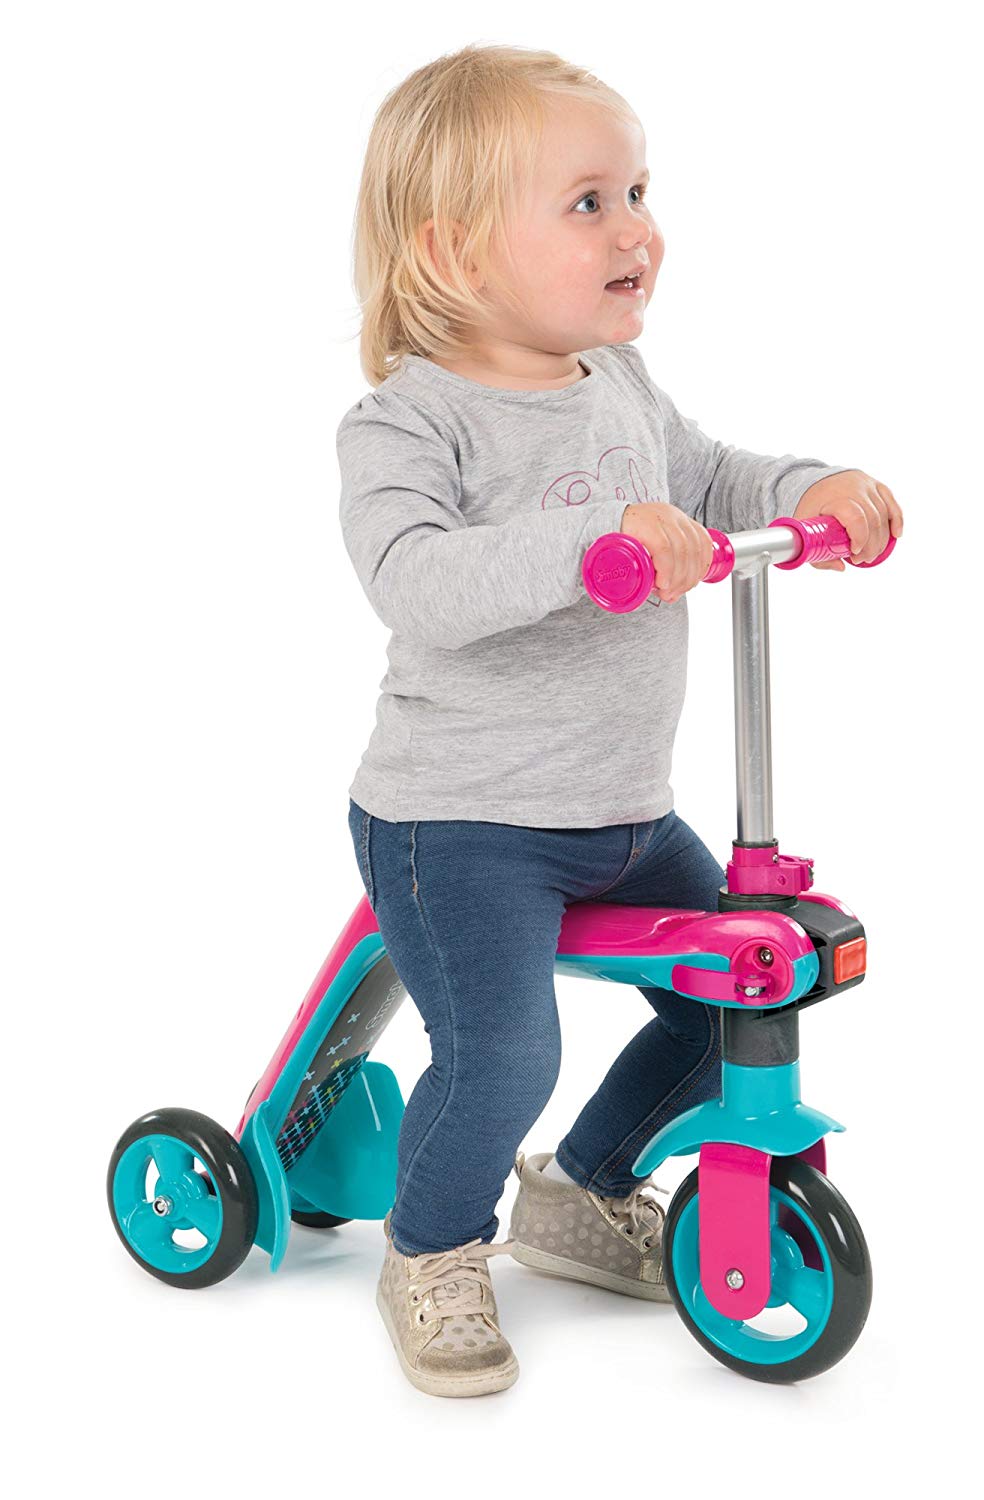 Smoby 7600750603 Ride Scooter – Pink